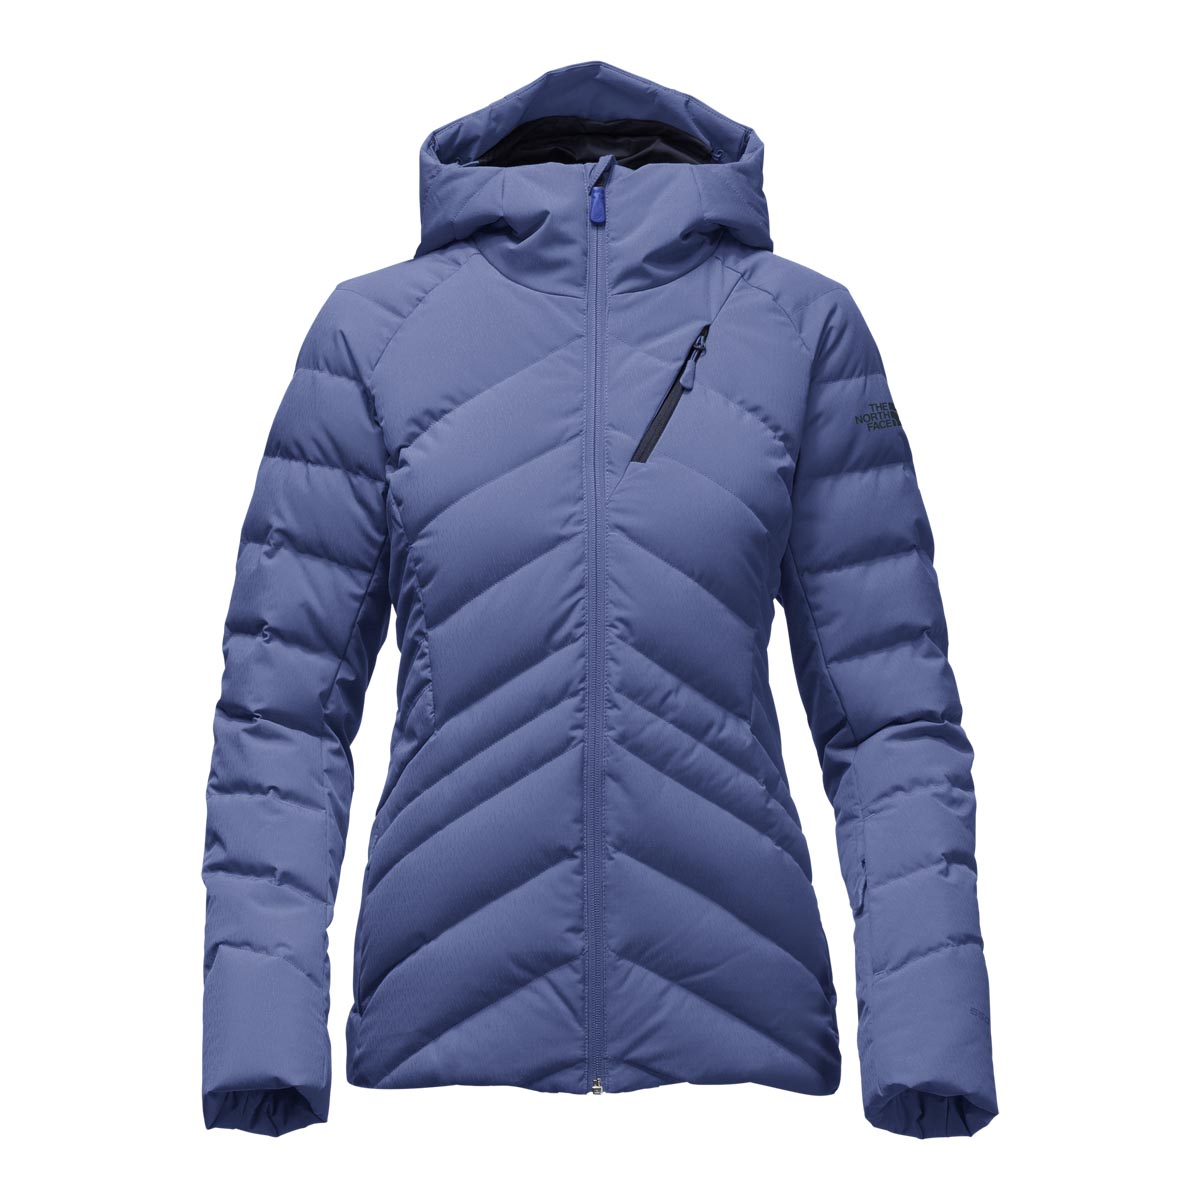 The North Face Women's Heavenly Jacket Discontinued Pricing